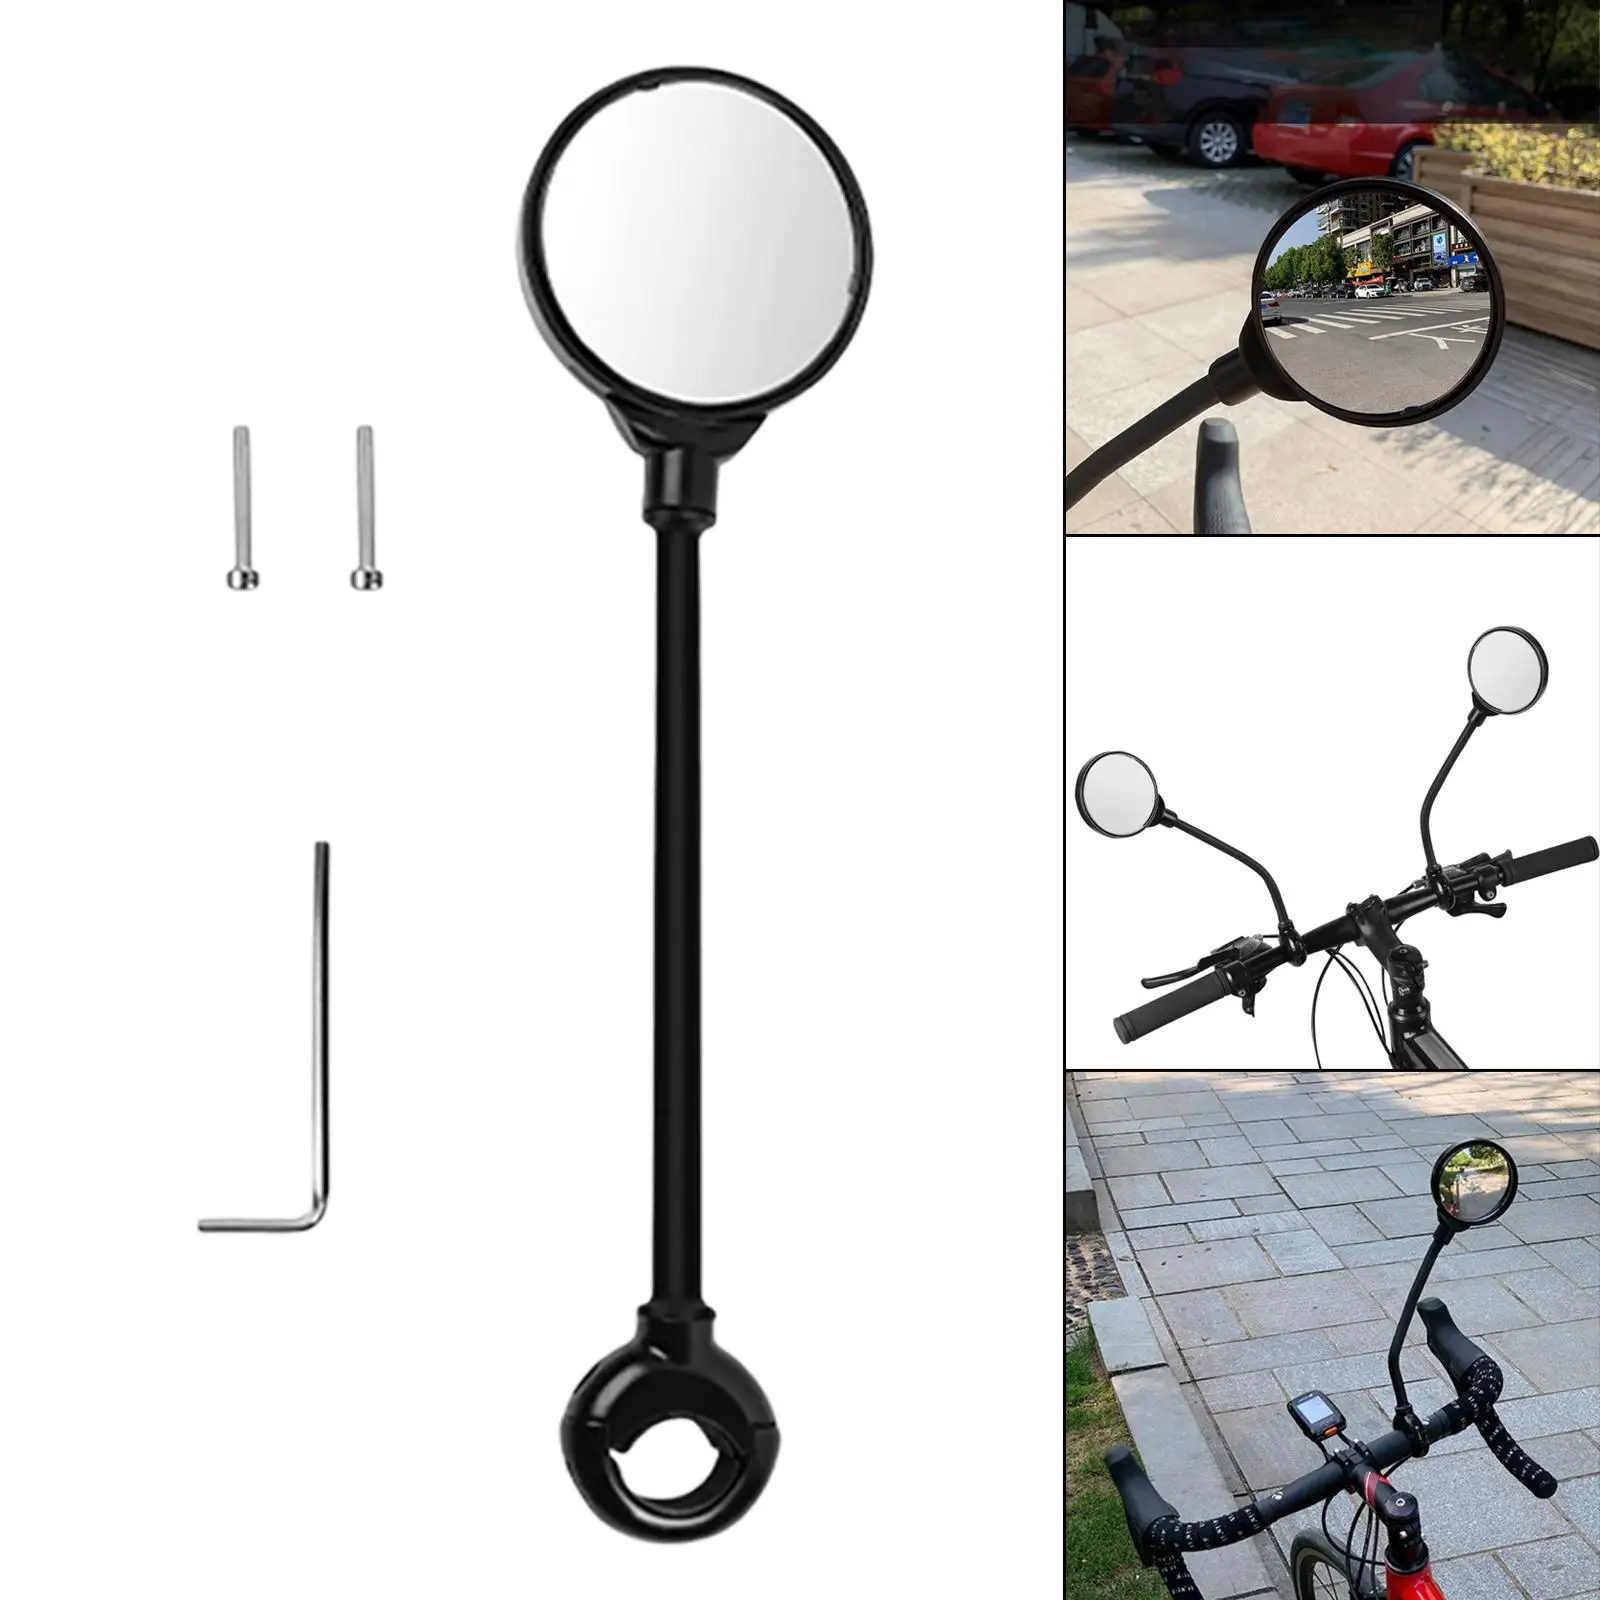 Bicycle Rear View Mirror Back Sight Adjustable Left Right Bike Handlebar